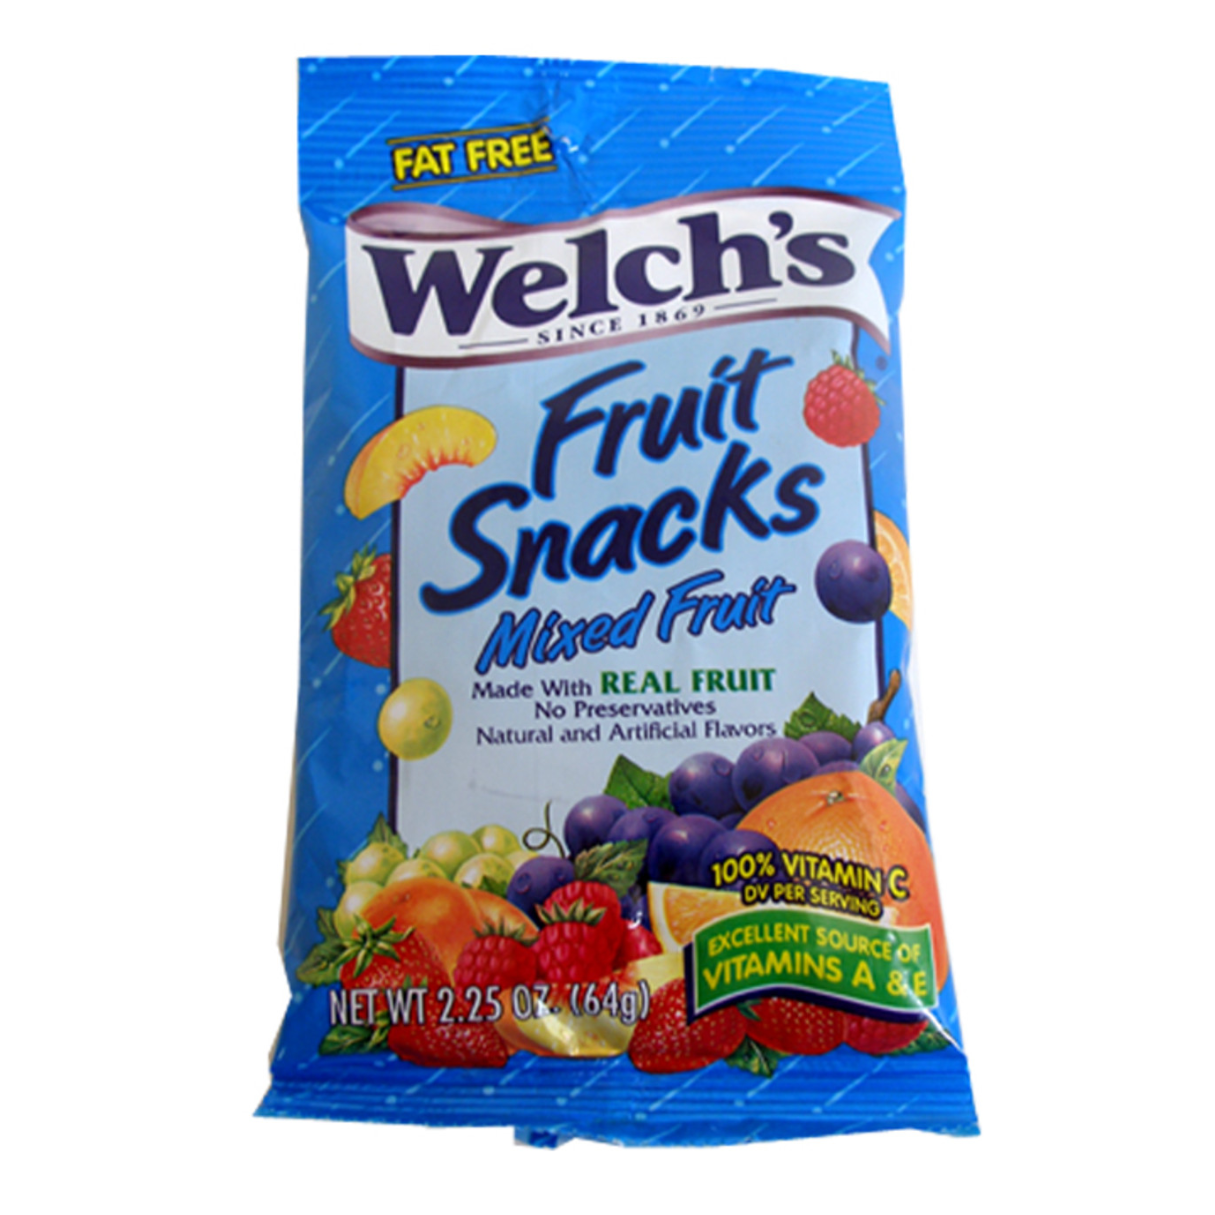 Welch's Mixed Fruit Snacks 2.25oz - 12ct